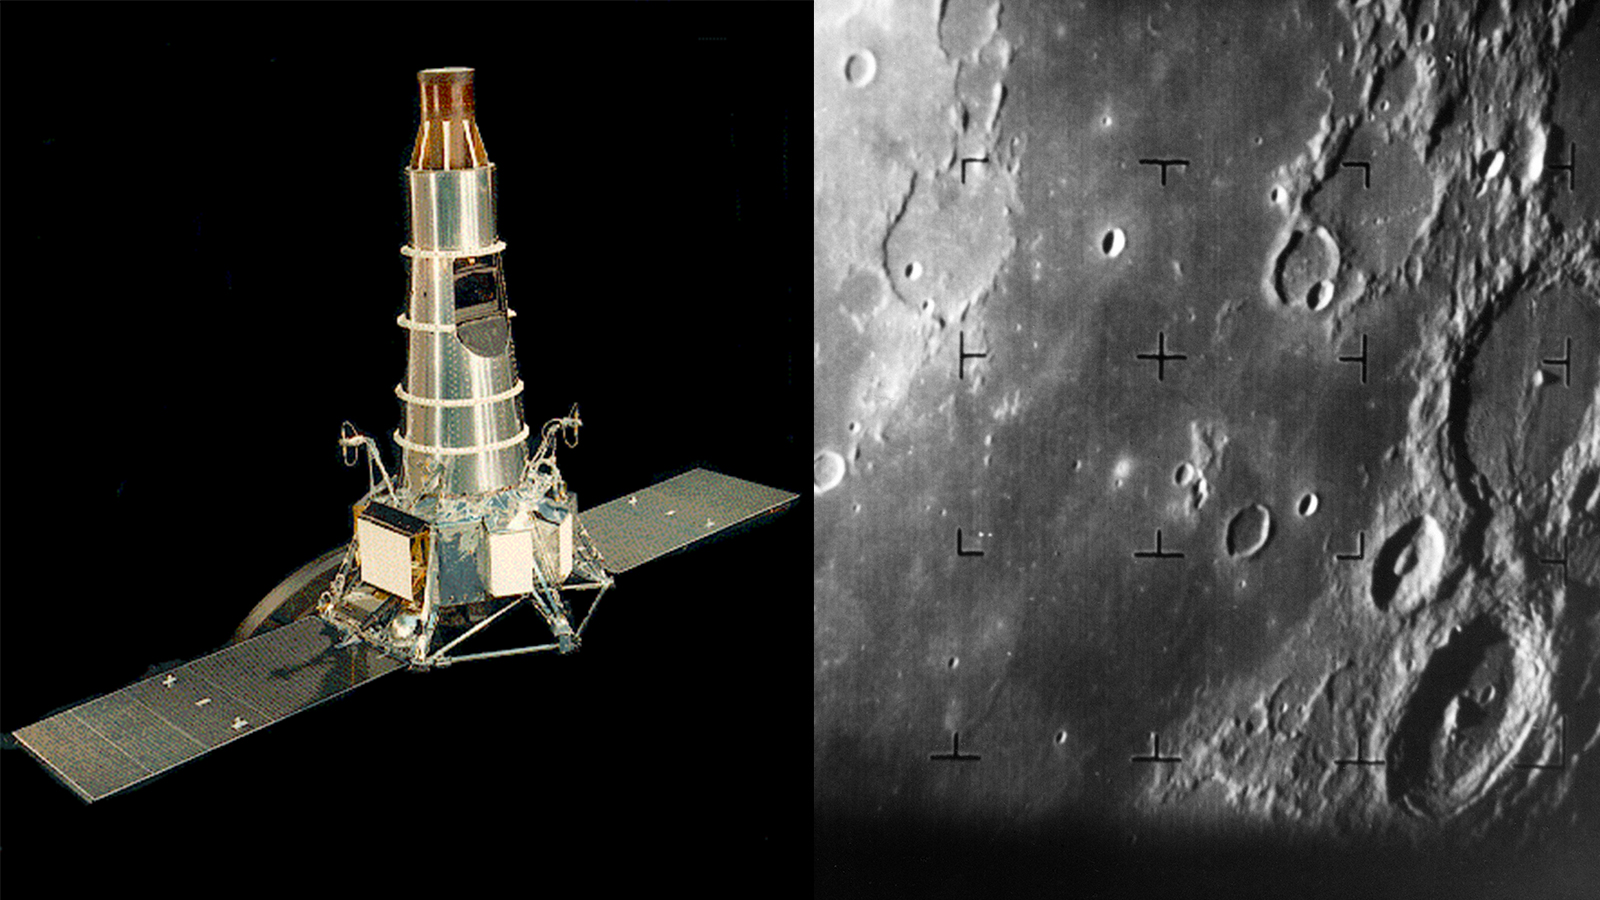 Side-by-side images of a model of the Ranger 7 spacecraft in color and a black and white image of the Moon taken by Ranger 7.